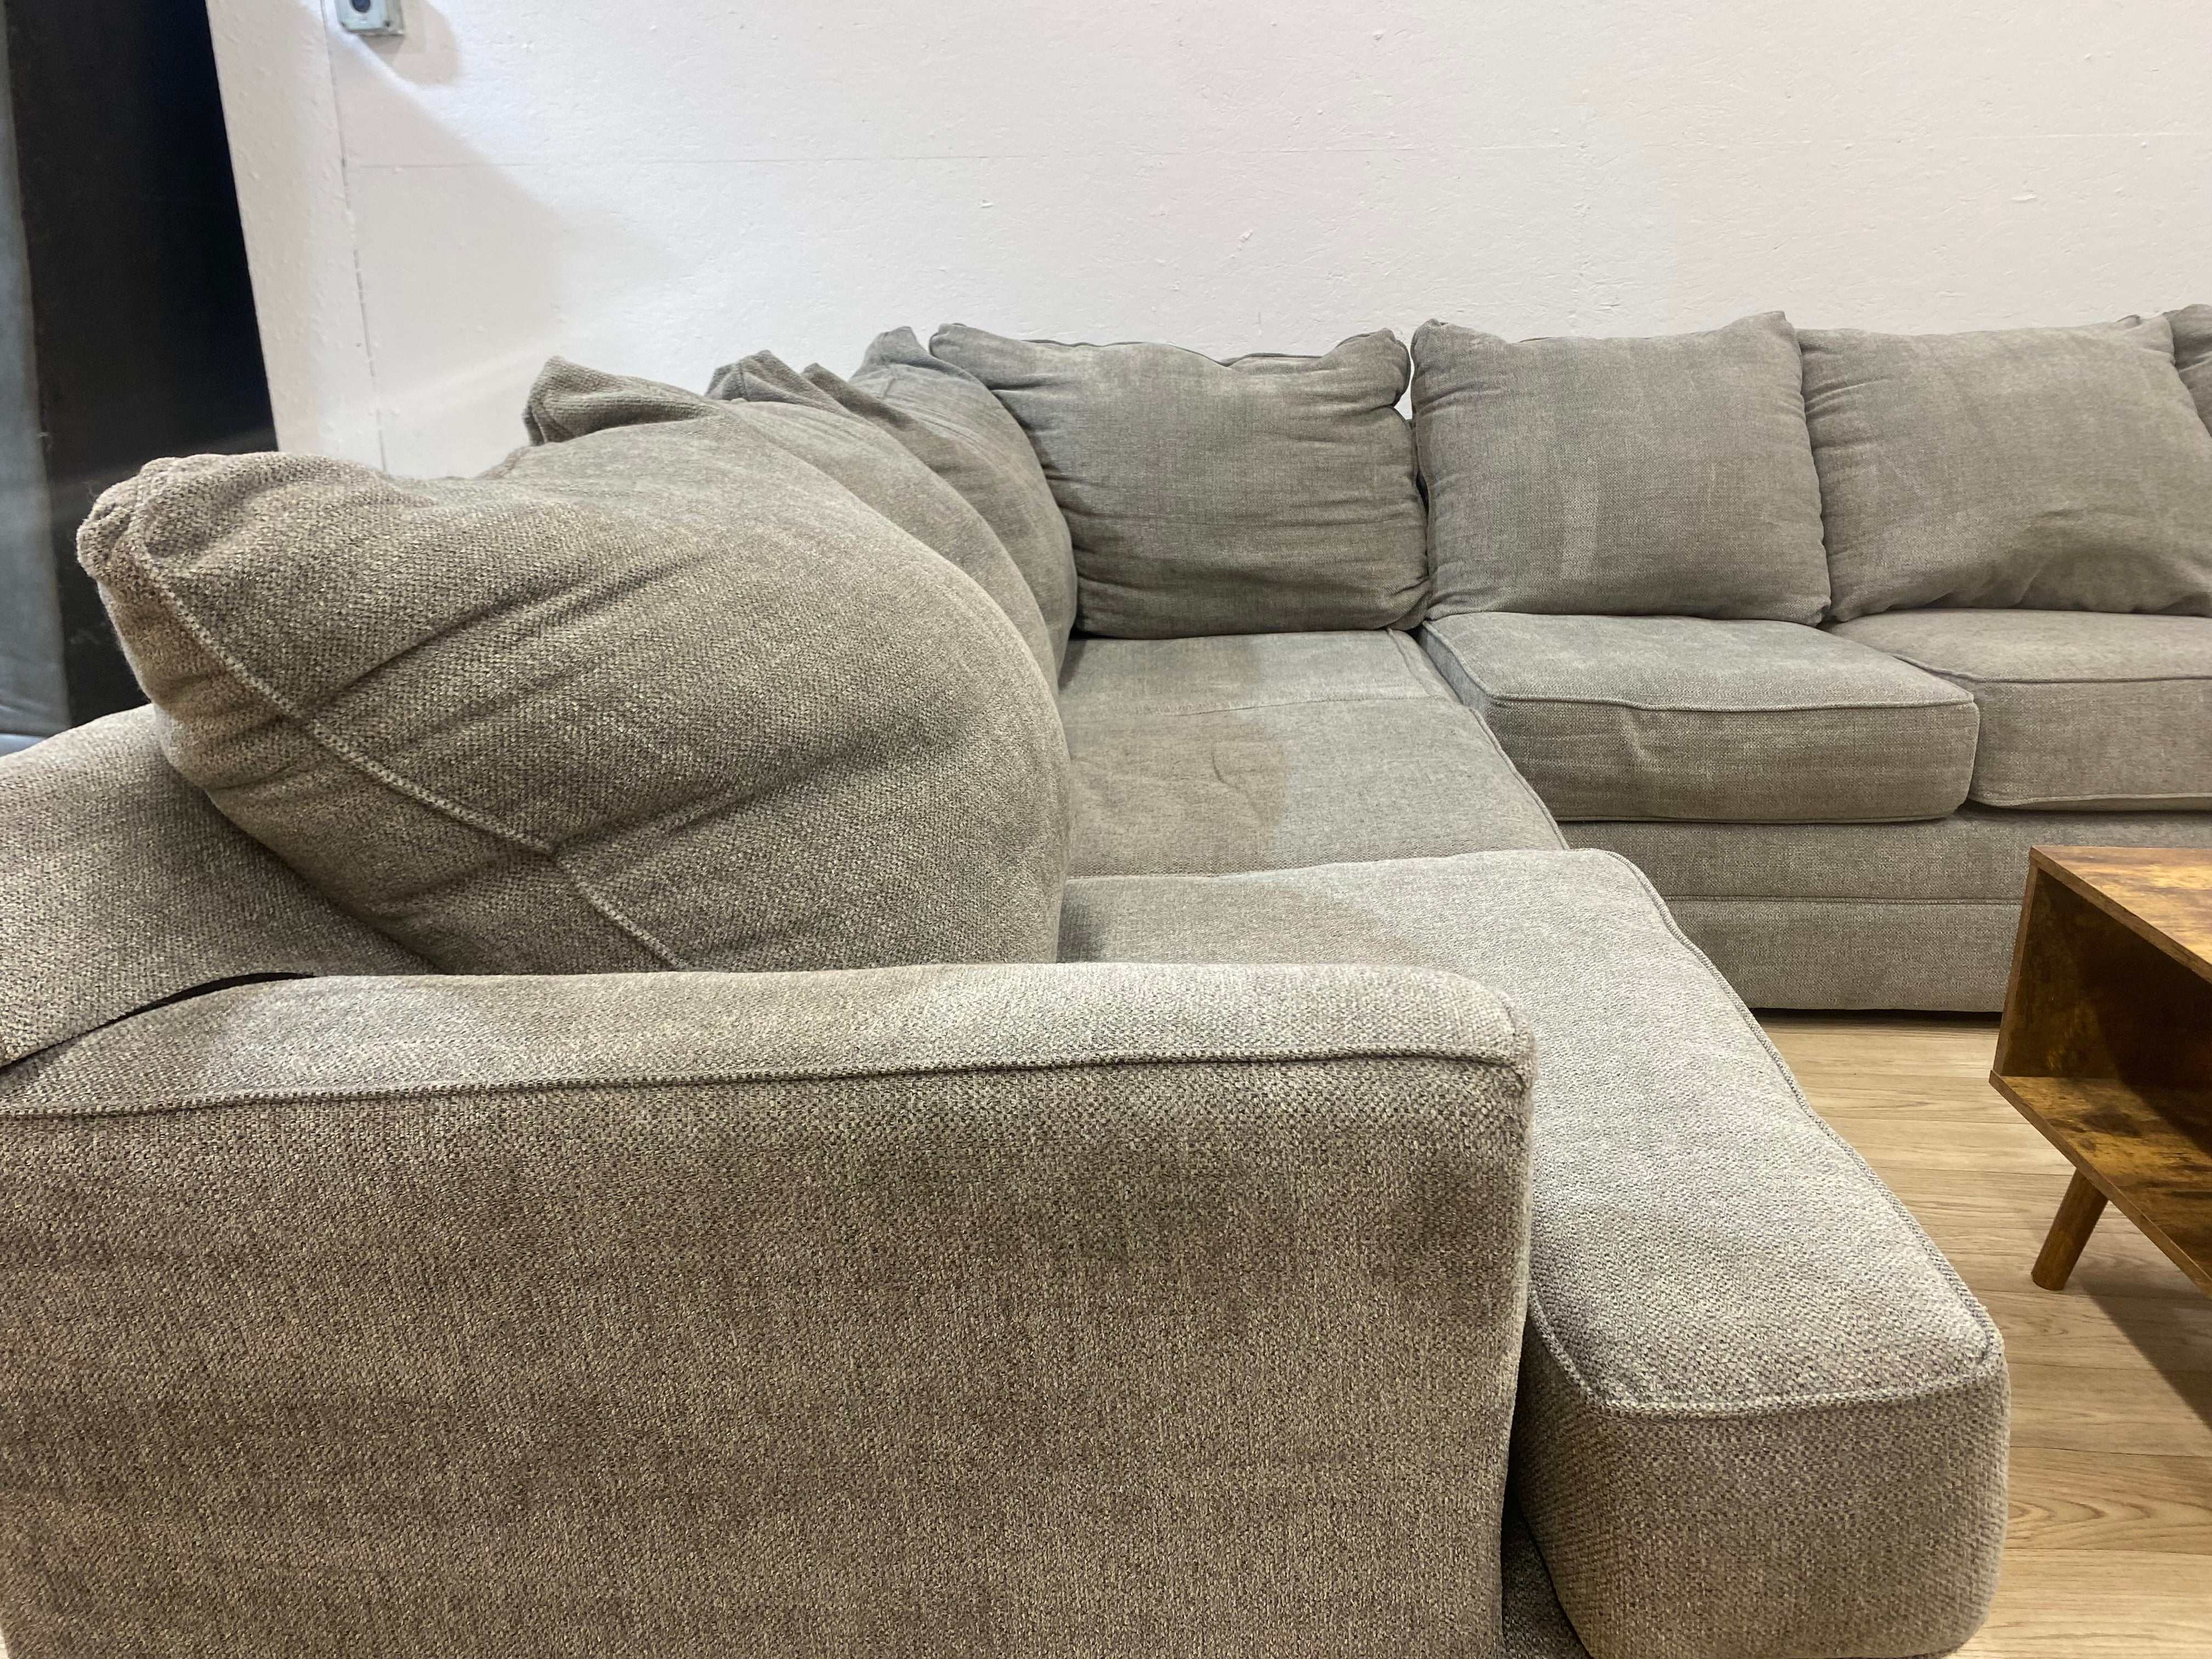 Broyhill L-Shaped Grey Sectional